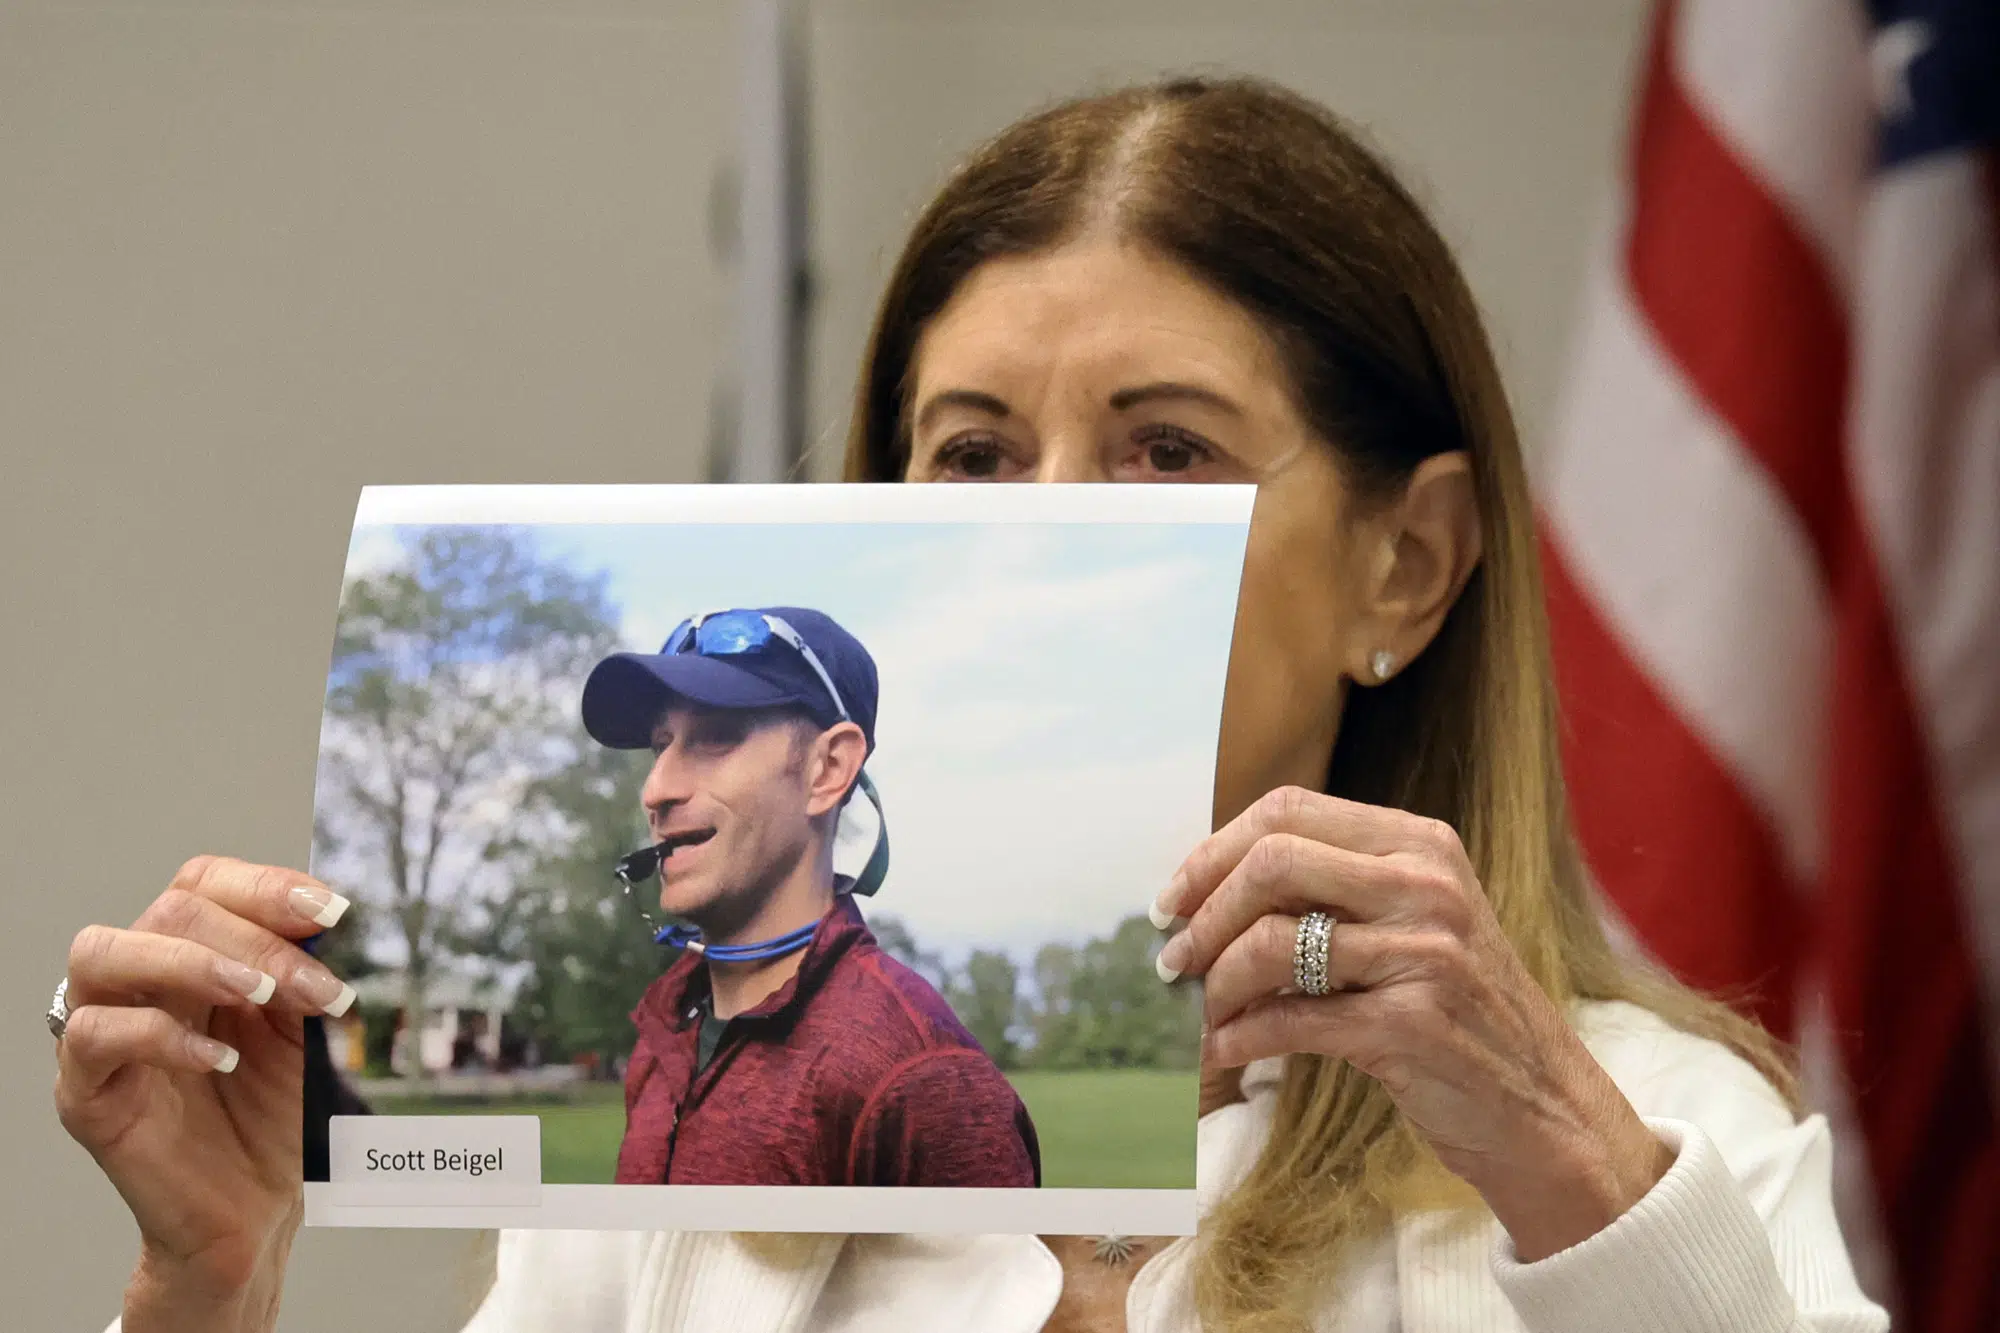 FILE - Linda Beigel Schulman holds a photograph of her son, Scott Beigel, before giving her victim impact statement during the penalty phase of Marjory Stoneman Douglas High School shooter Nikolas Cruz's trial at the Broward County Courthouse in Fort Lauderdale, Fla., Monday, Aug. 1, 2022. Scott Beigel was killed in the 2018 shootings. (Amy Beth Bennett/South Florida Sun Sentinel via AP, Pool, File)